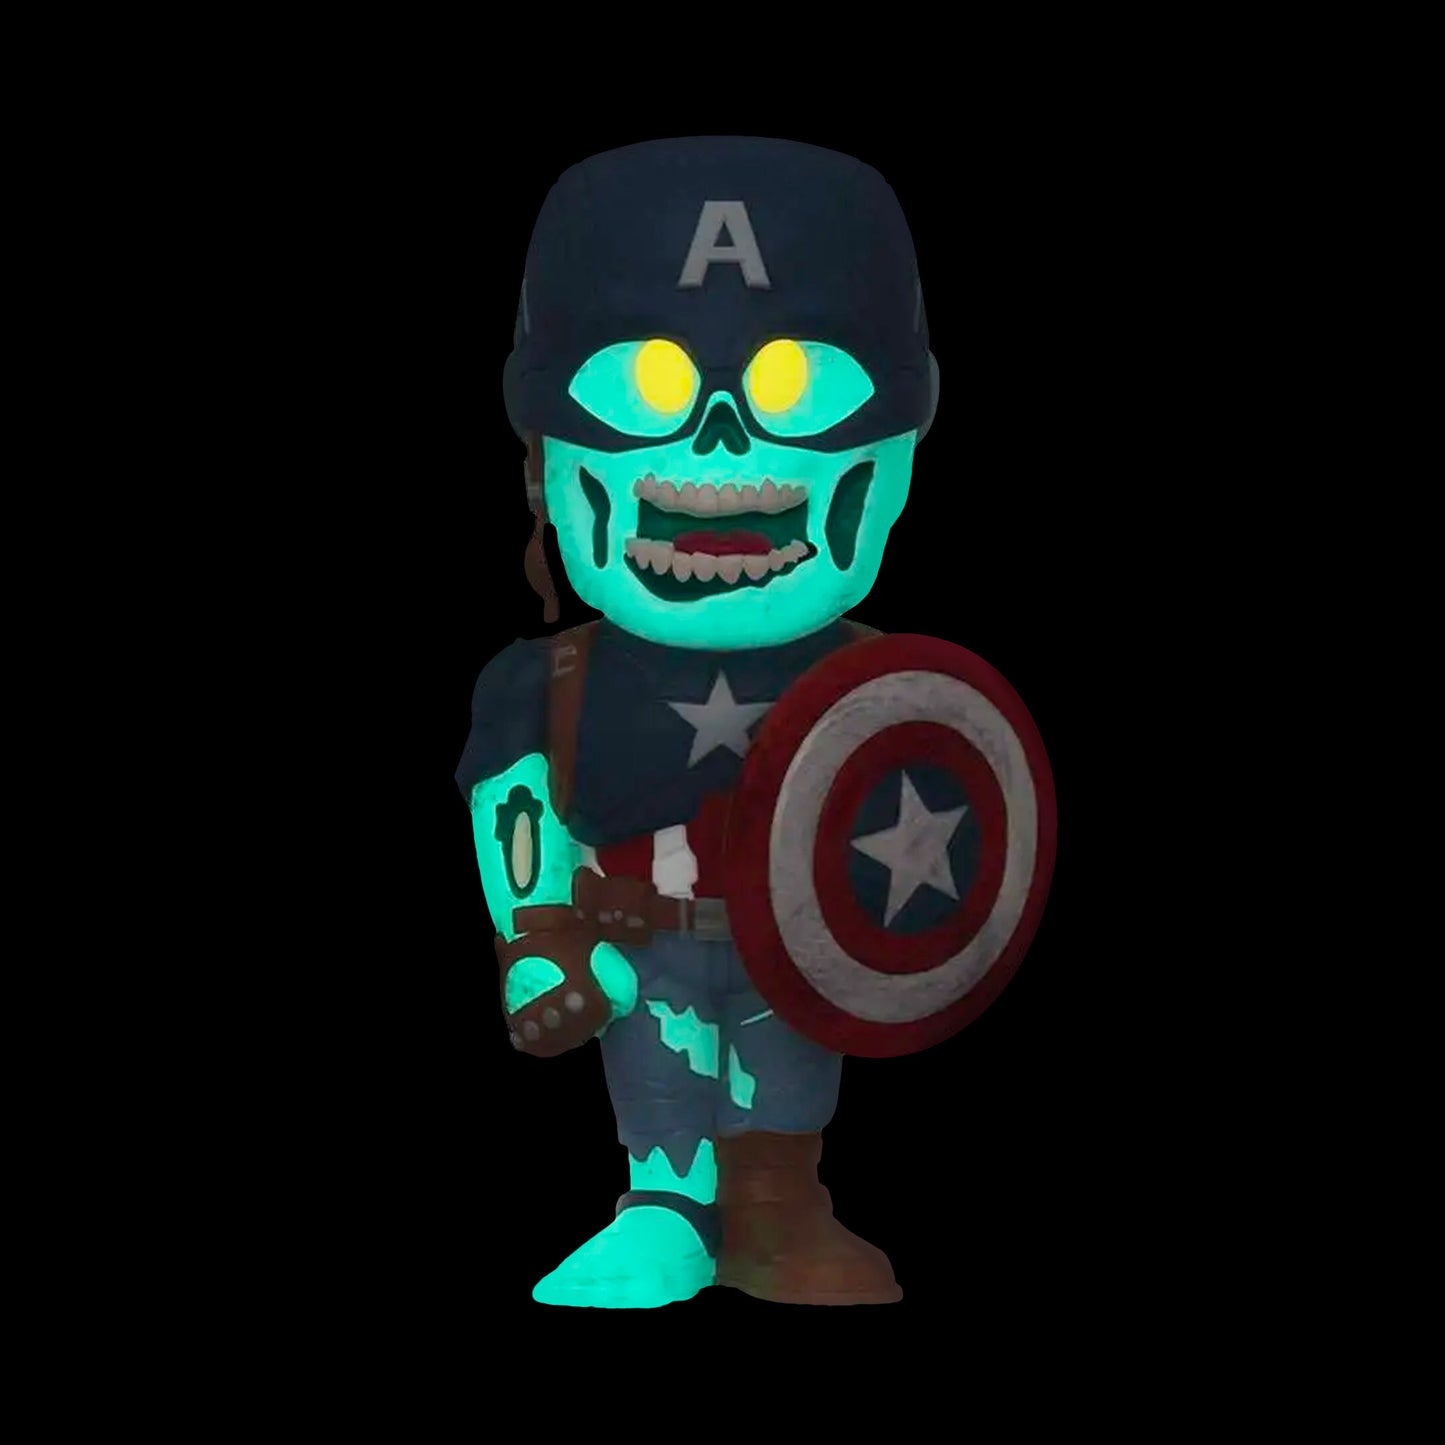 Funko Vinyl SODA: What If...? Zombie Captain America 12,500 Limited Edition (1 in 6 Chance at Chase)